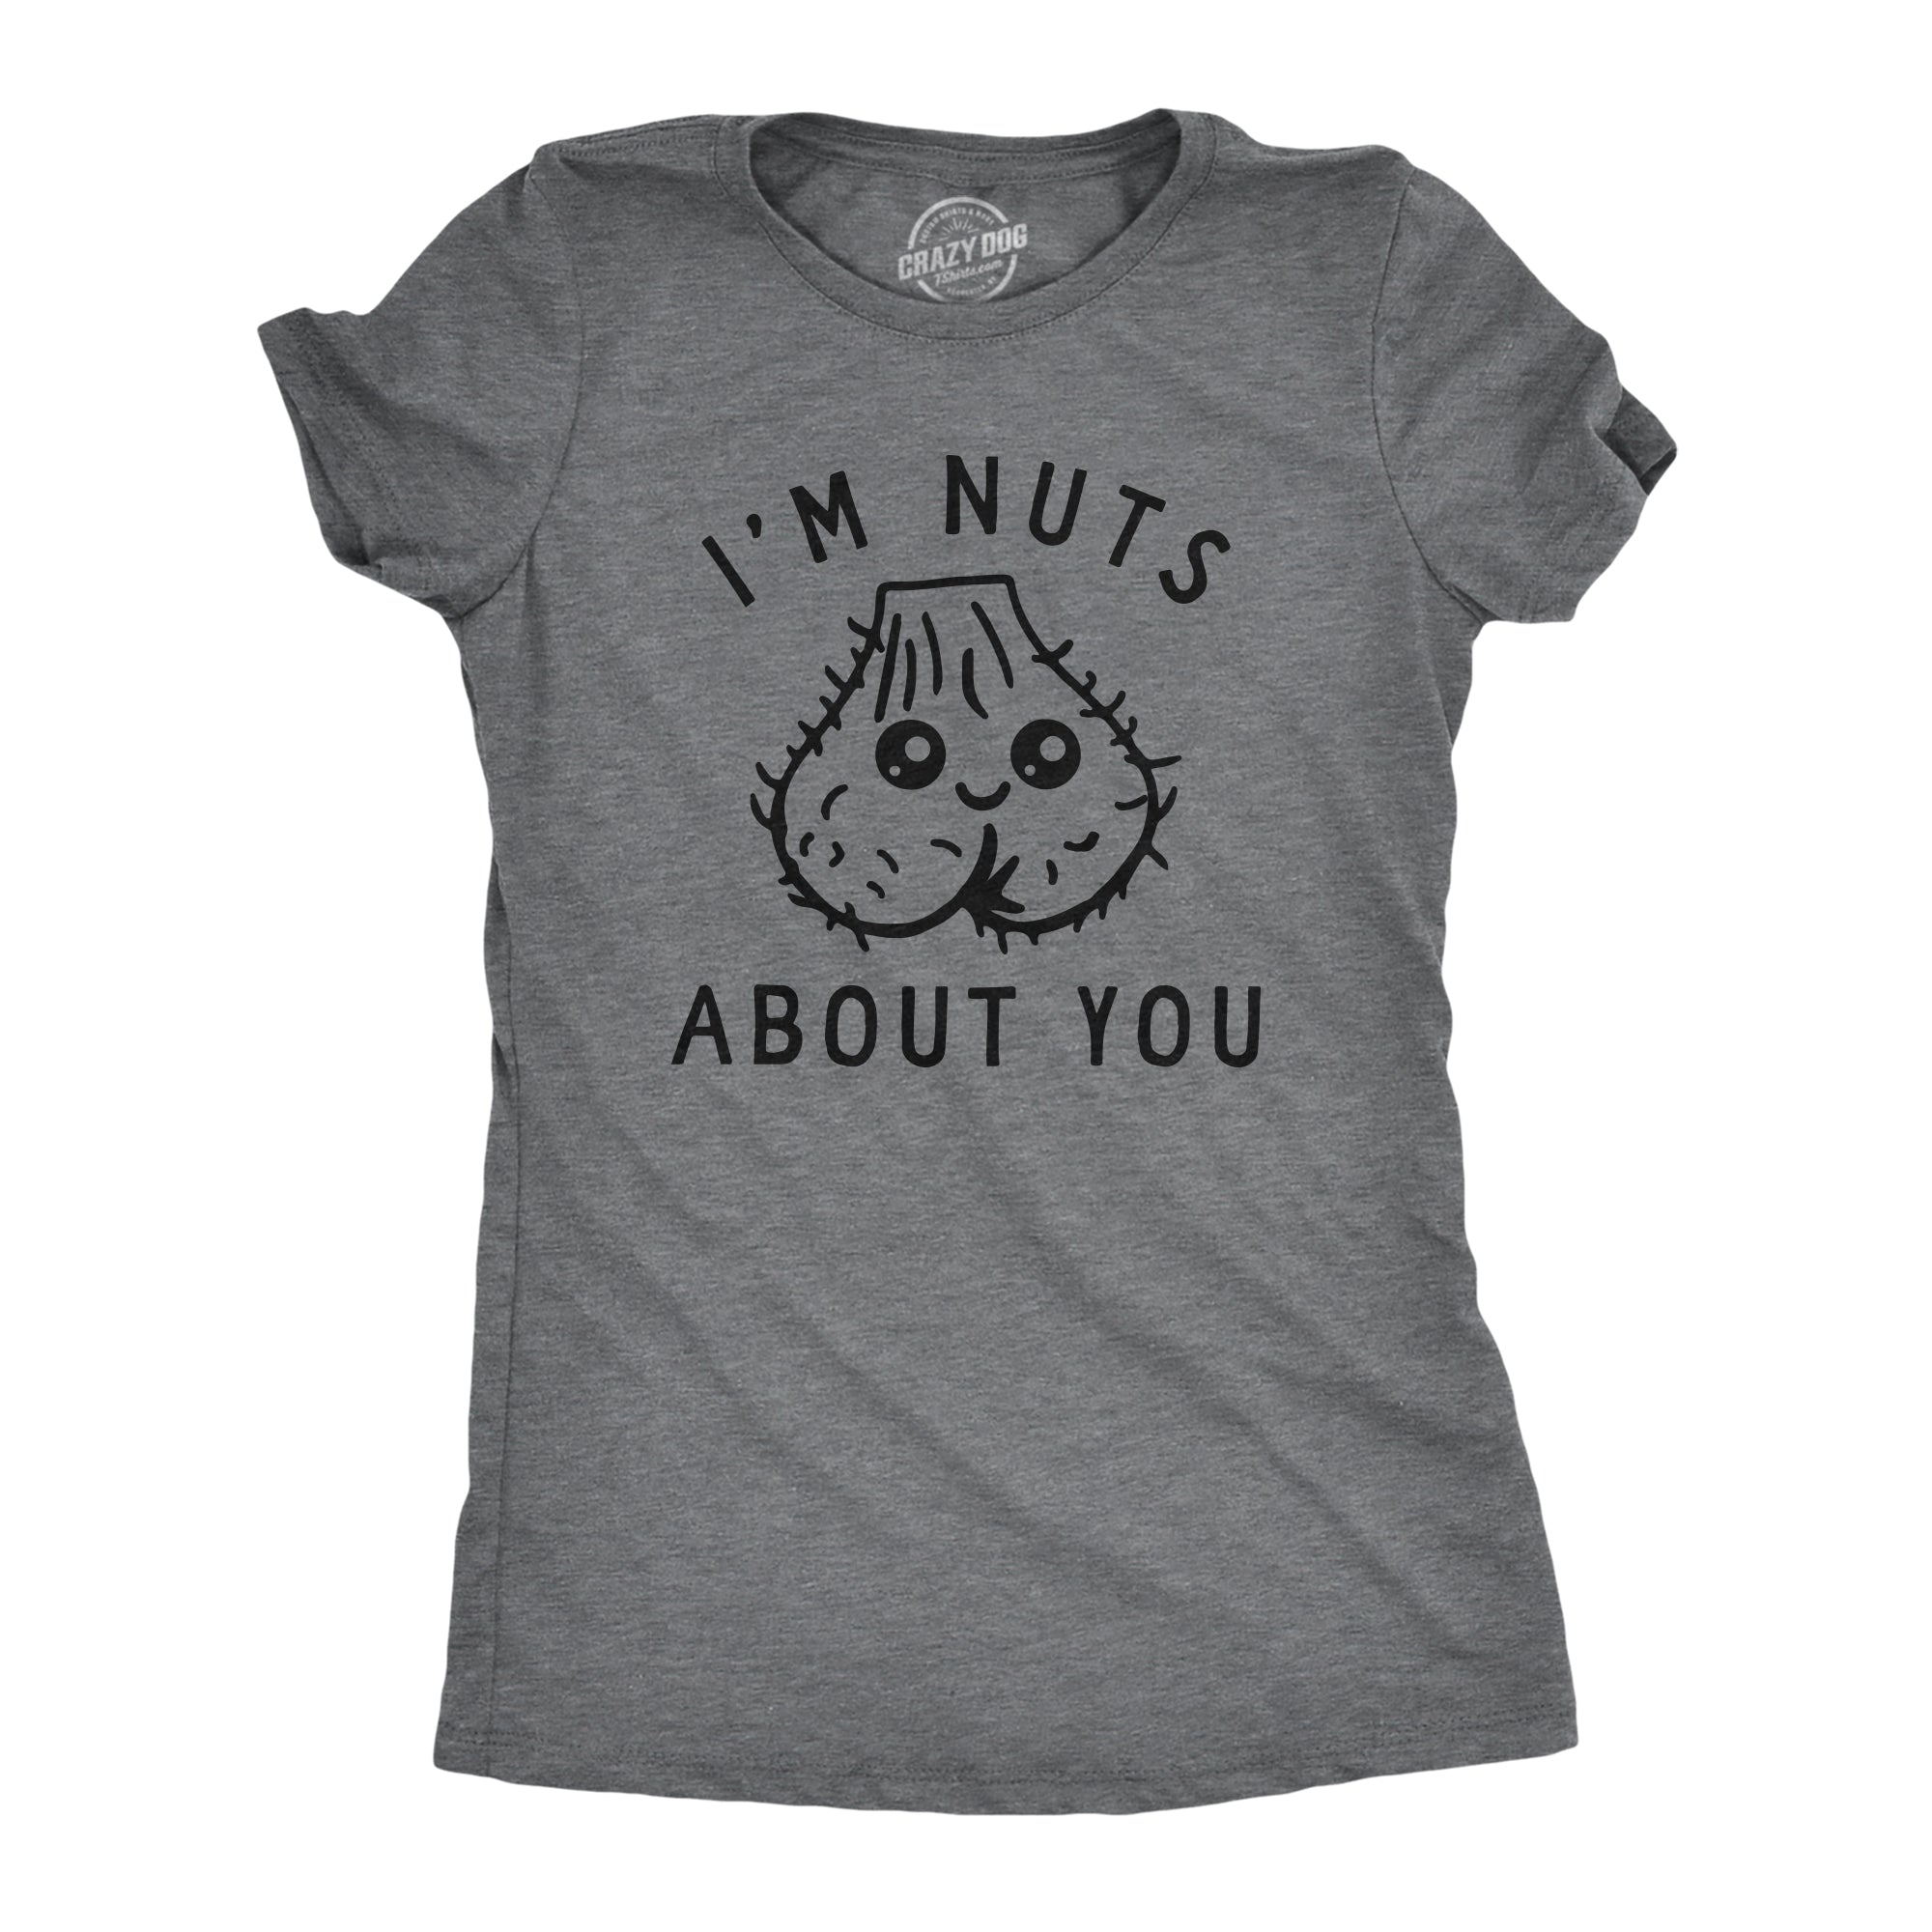 Funny Dark Heather Grey - NUTS Im Nuts About You Womens T Shirt Nerdy Sarcastic Tee